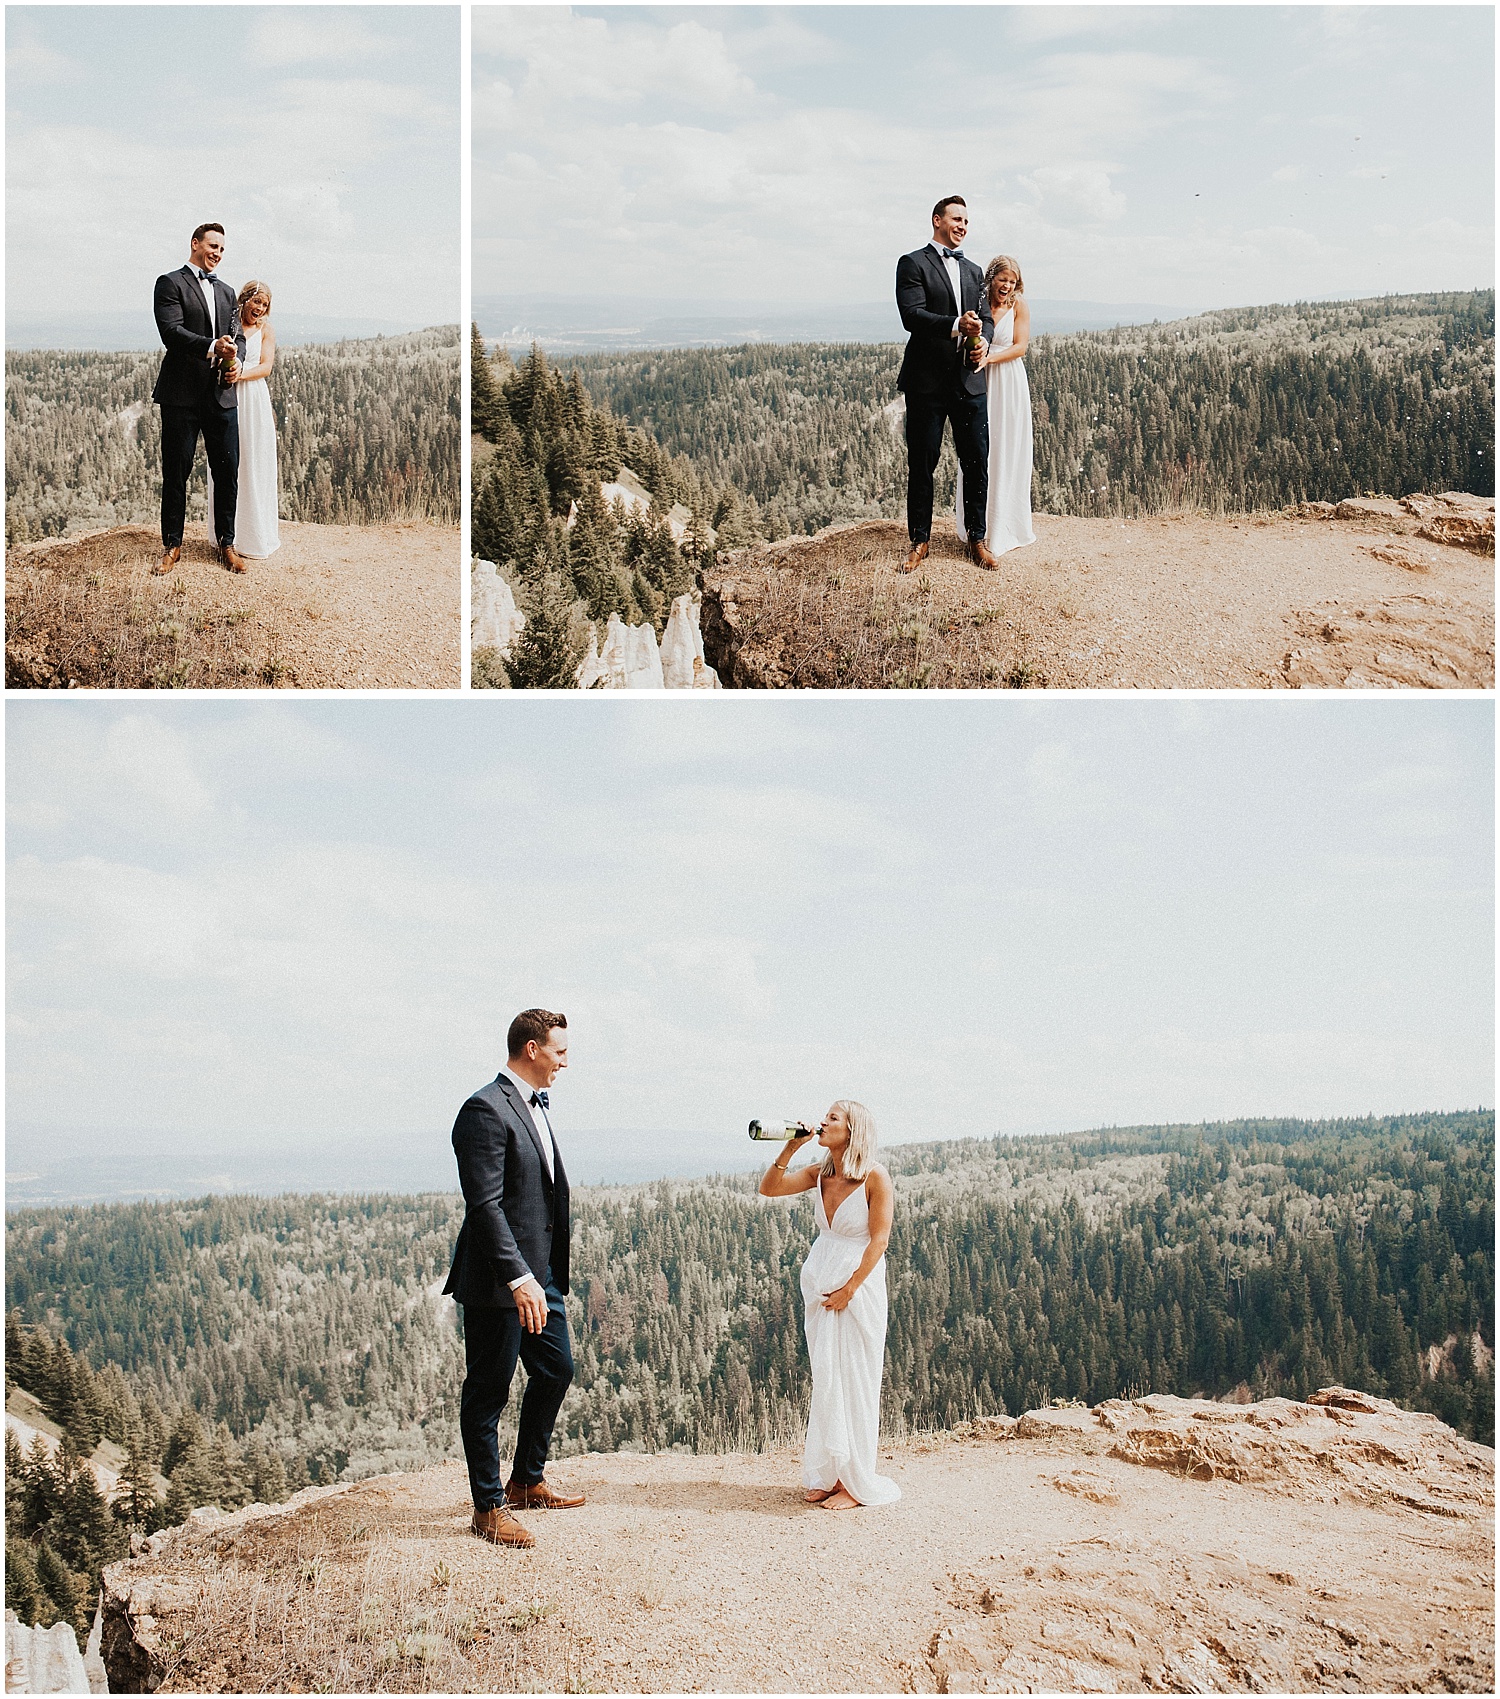  bc wedding photographer quesnel couple popping champagne fun photography pinnacles park lookout point 